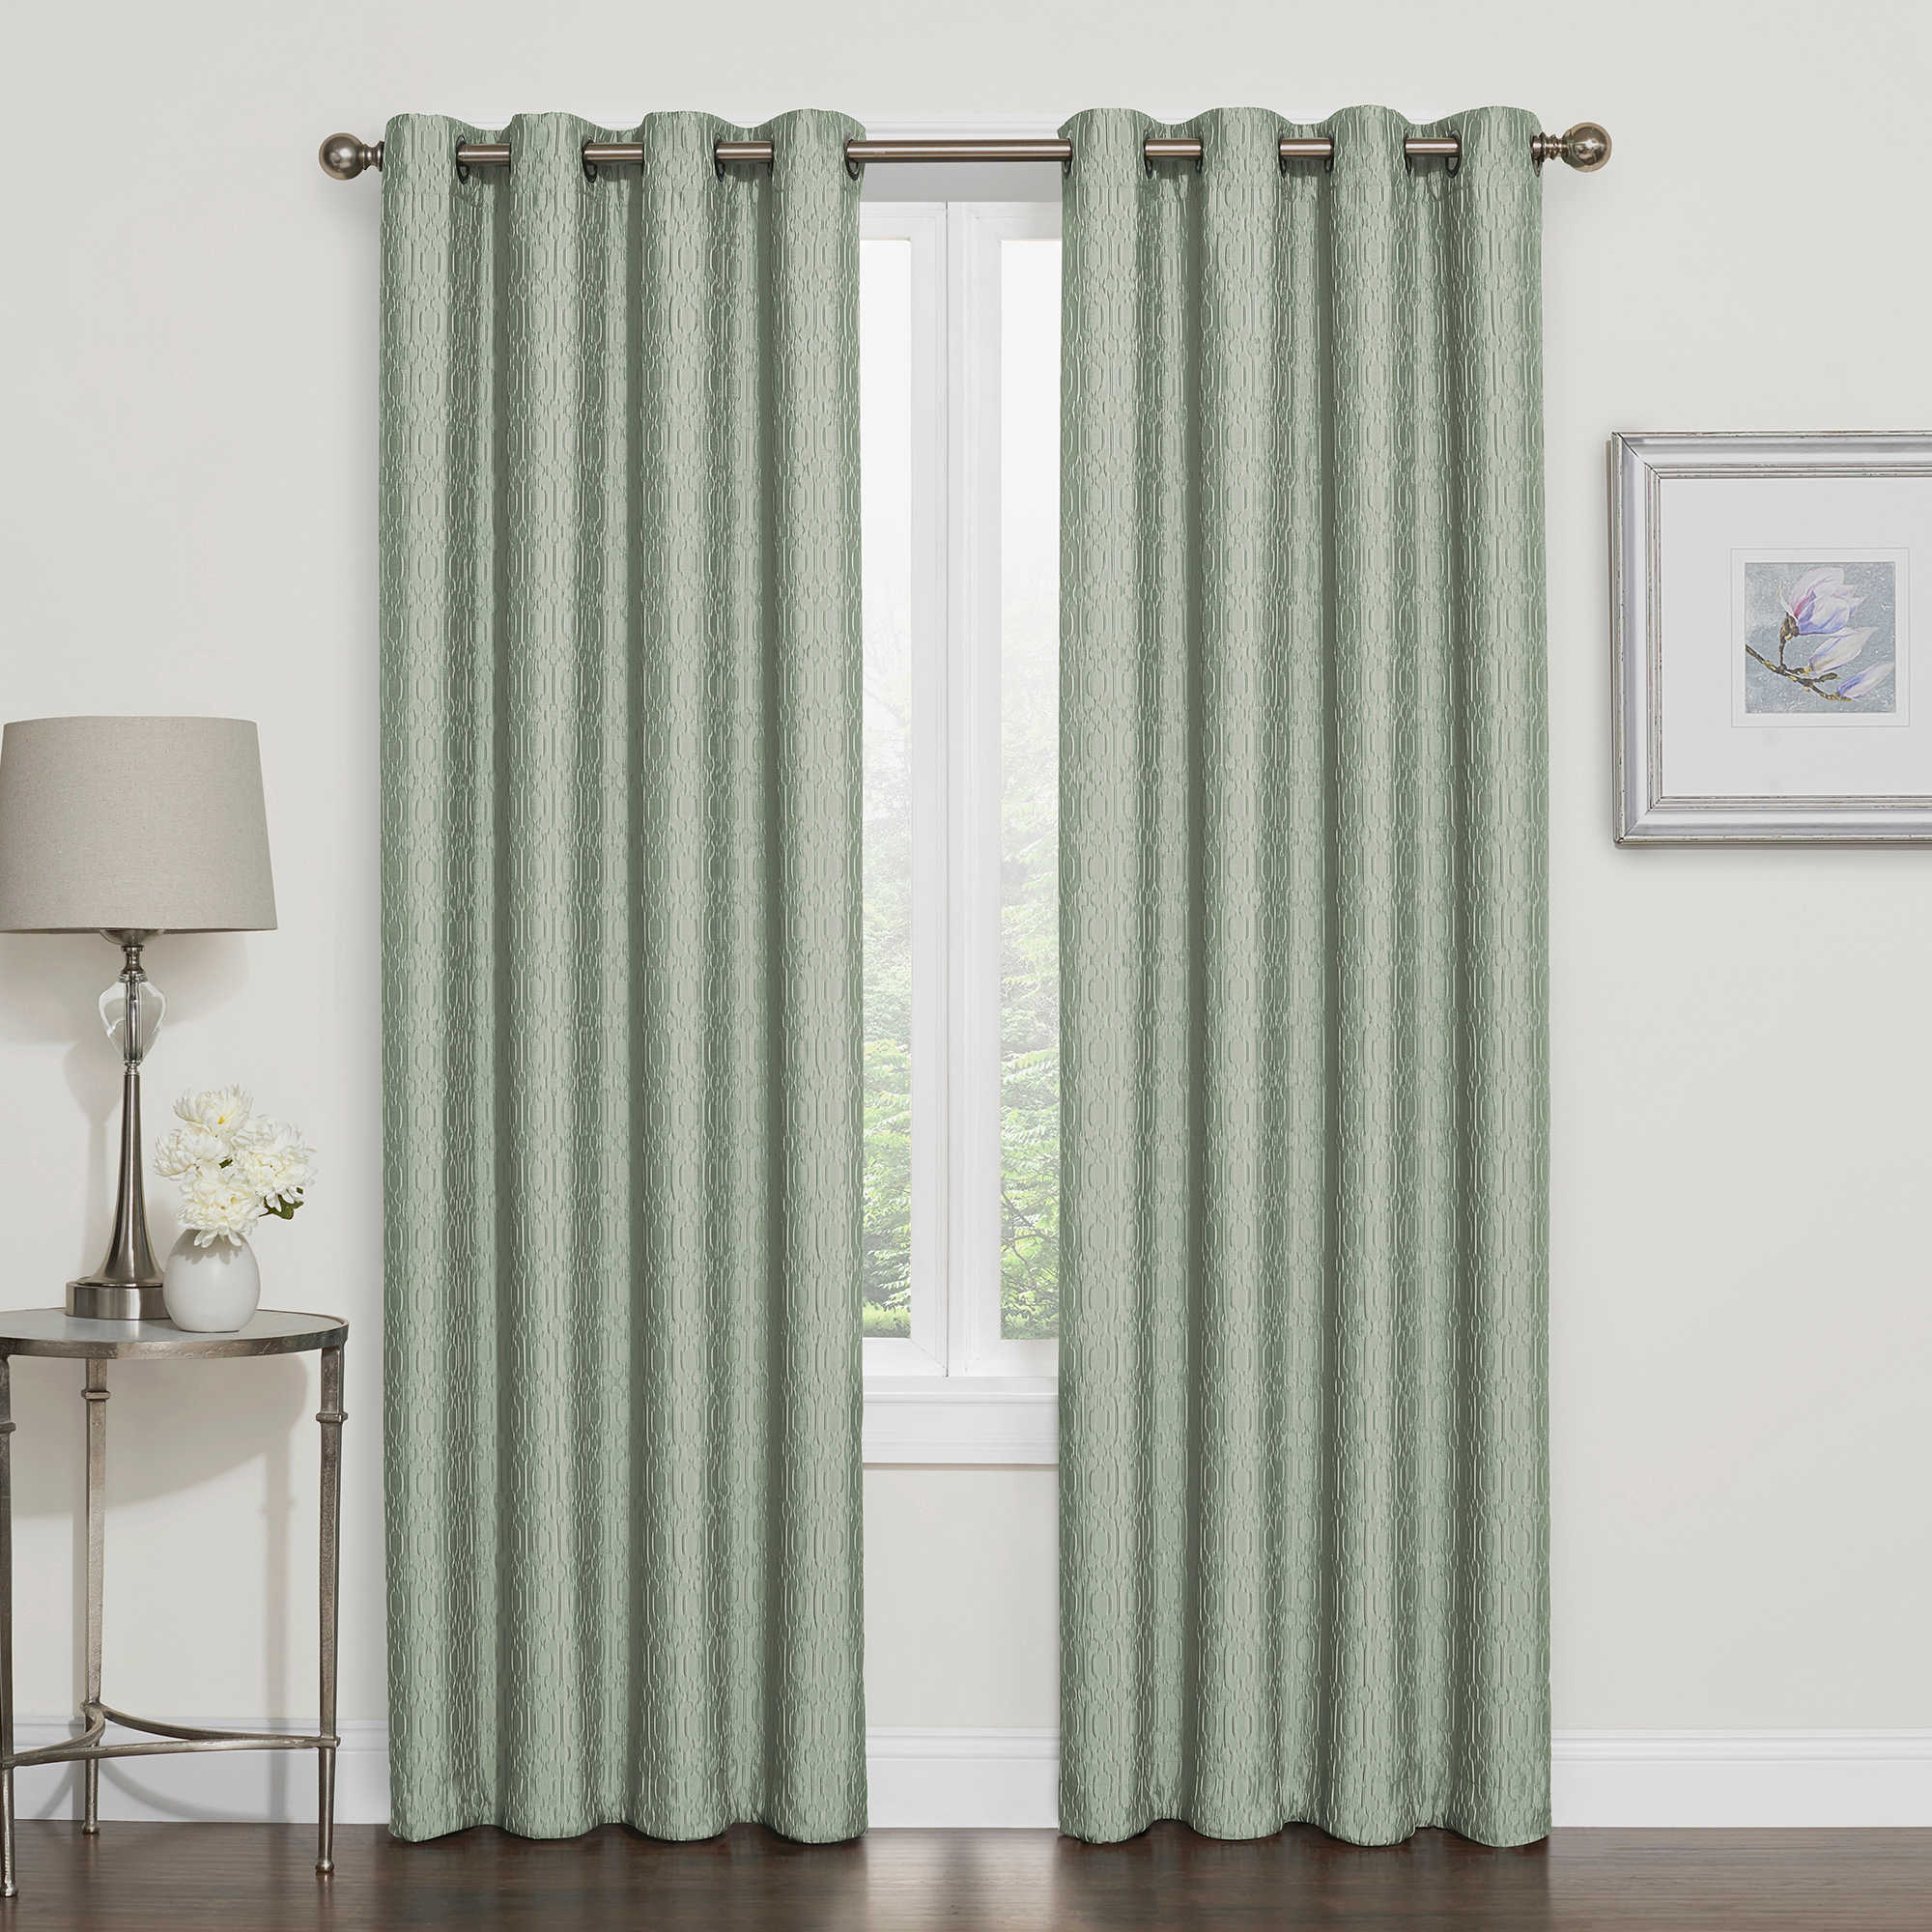 Window Curtains & Drapes - Grommet, Rod Pocket & more styles | Bed ...